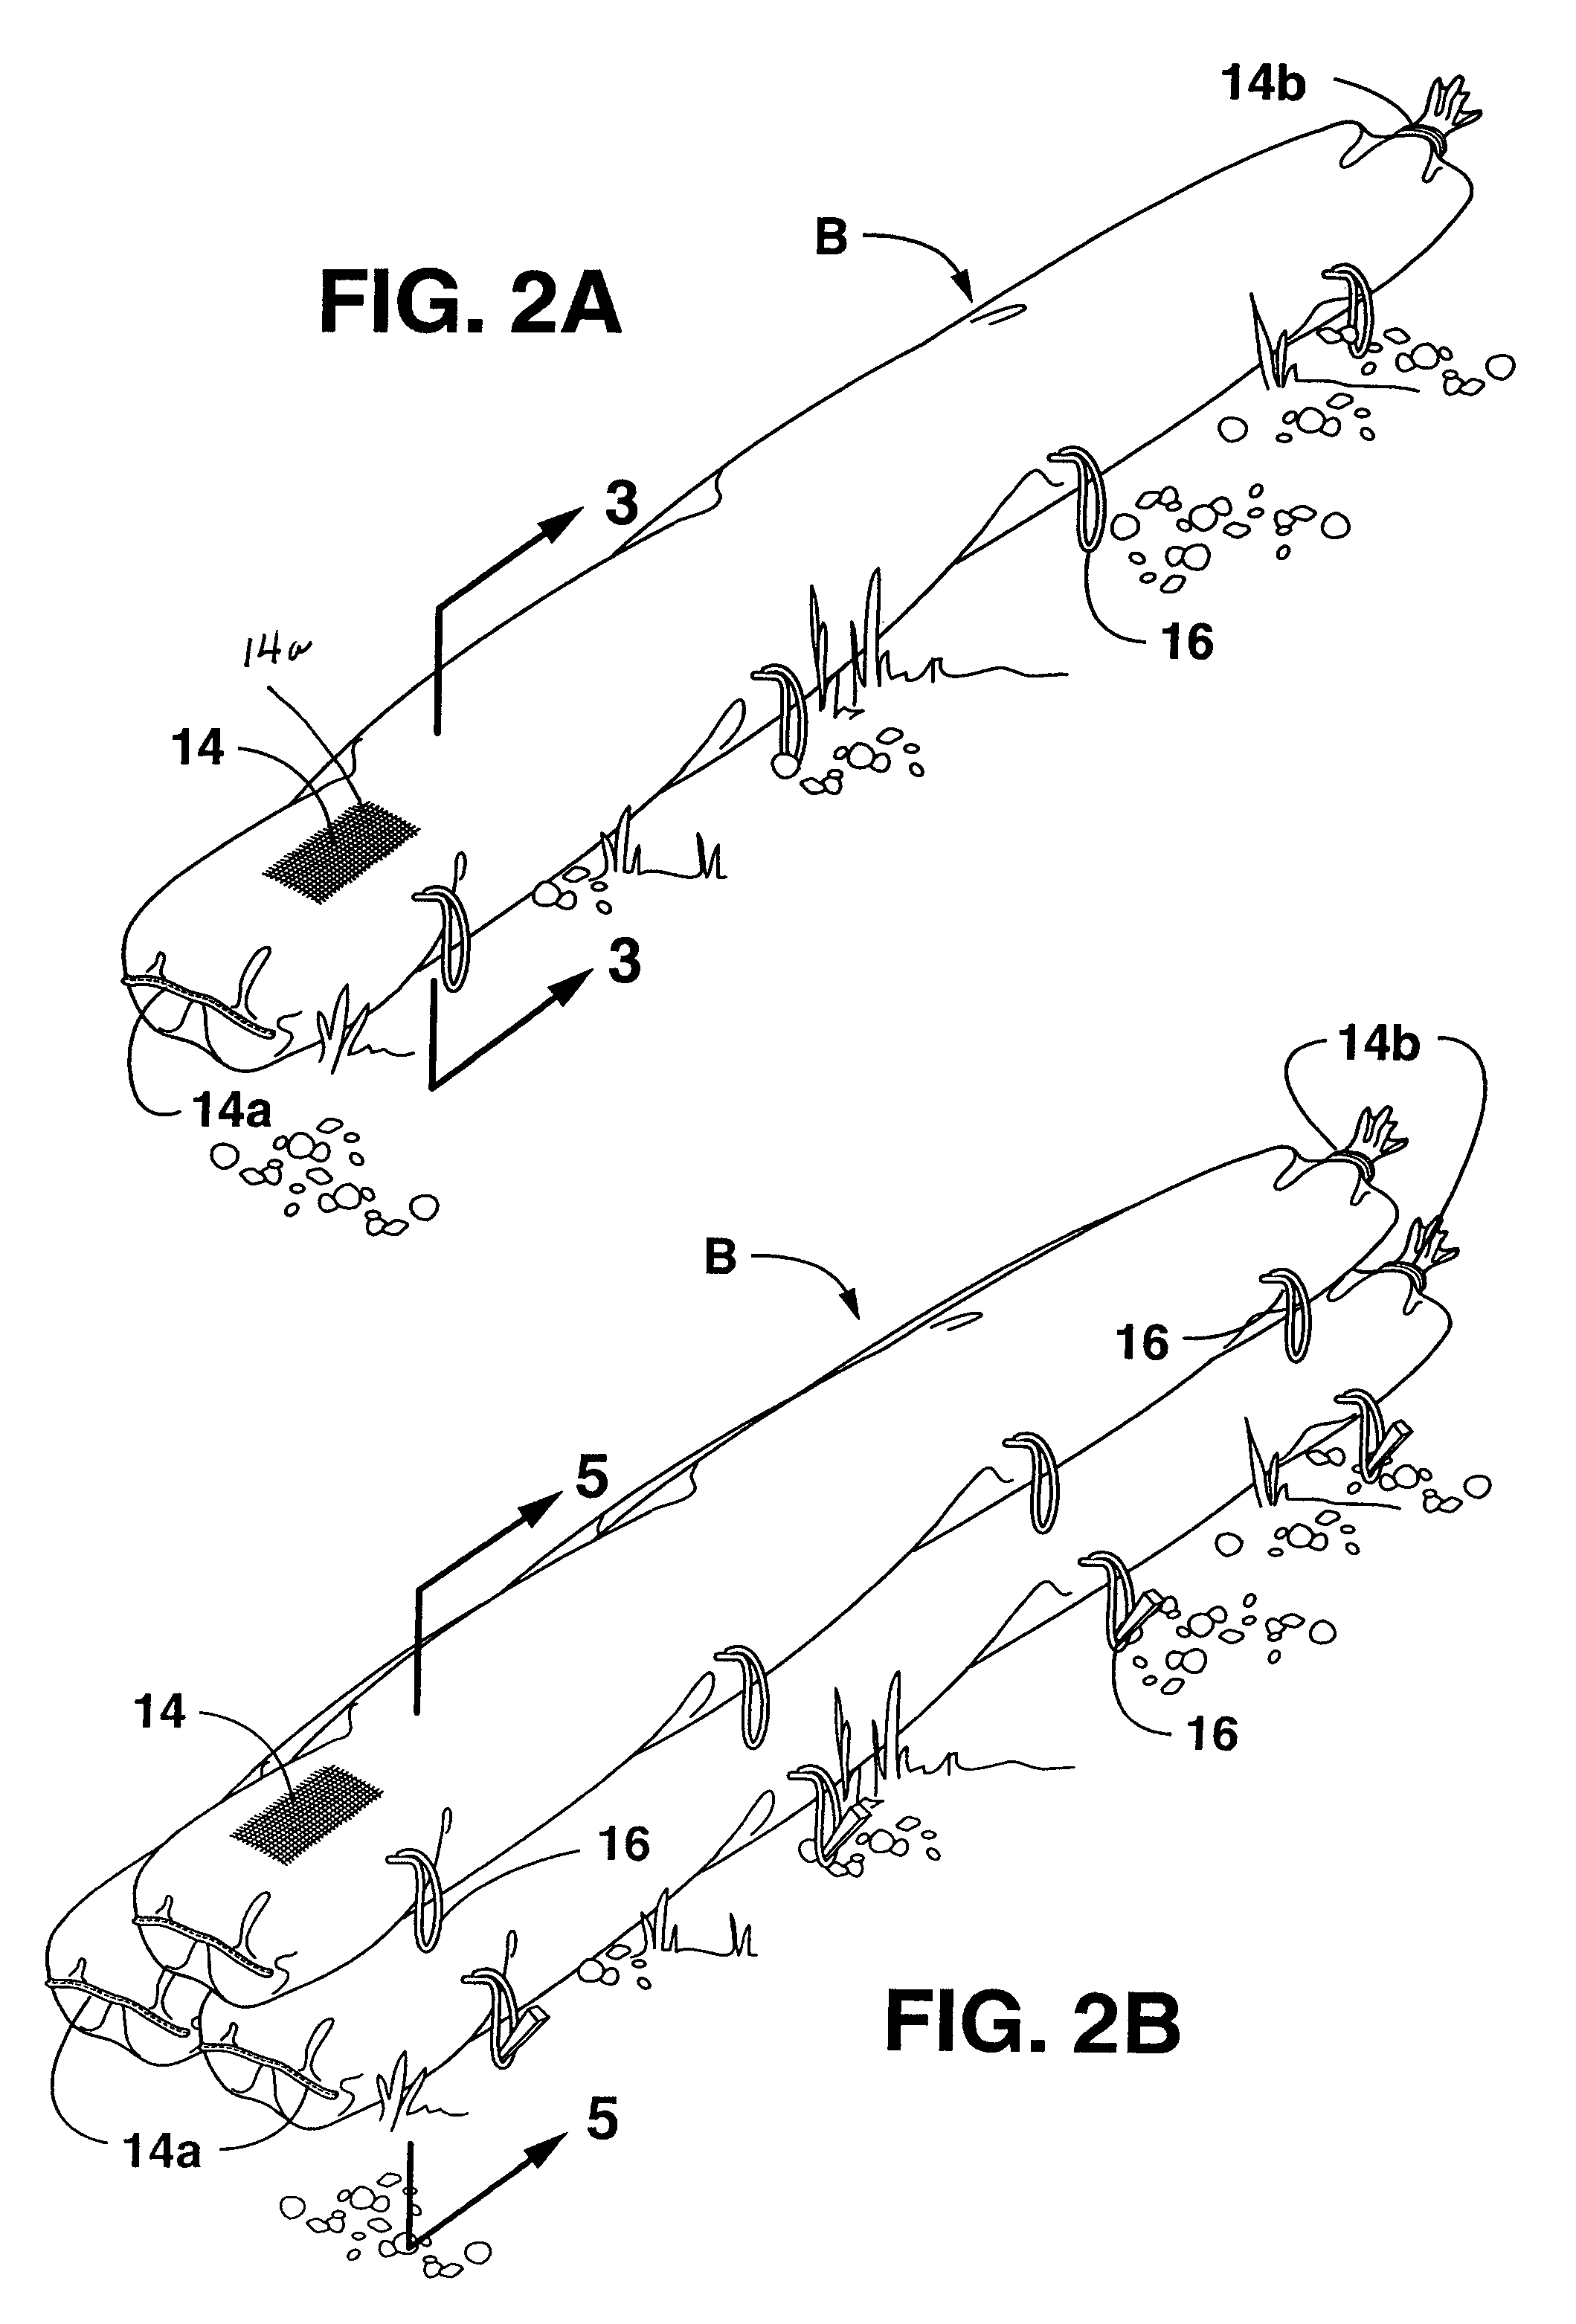 Water filtration and erosion control system